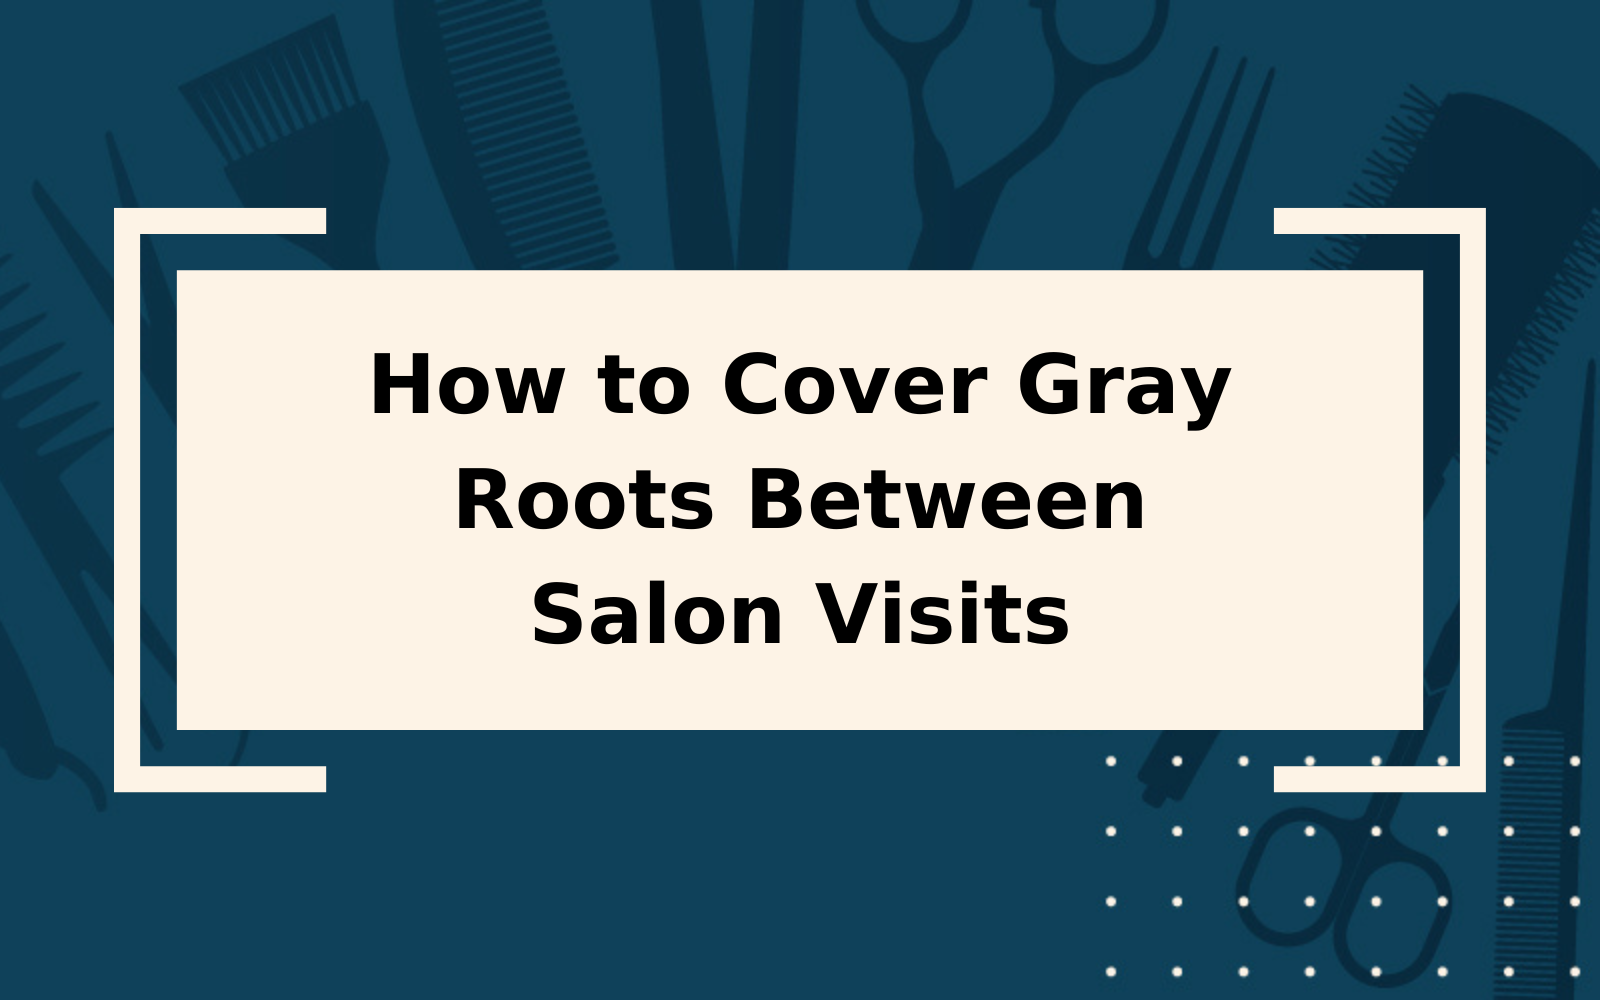 How to Cover Gray Roots Between Salon Visits